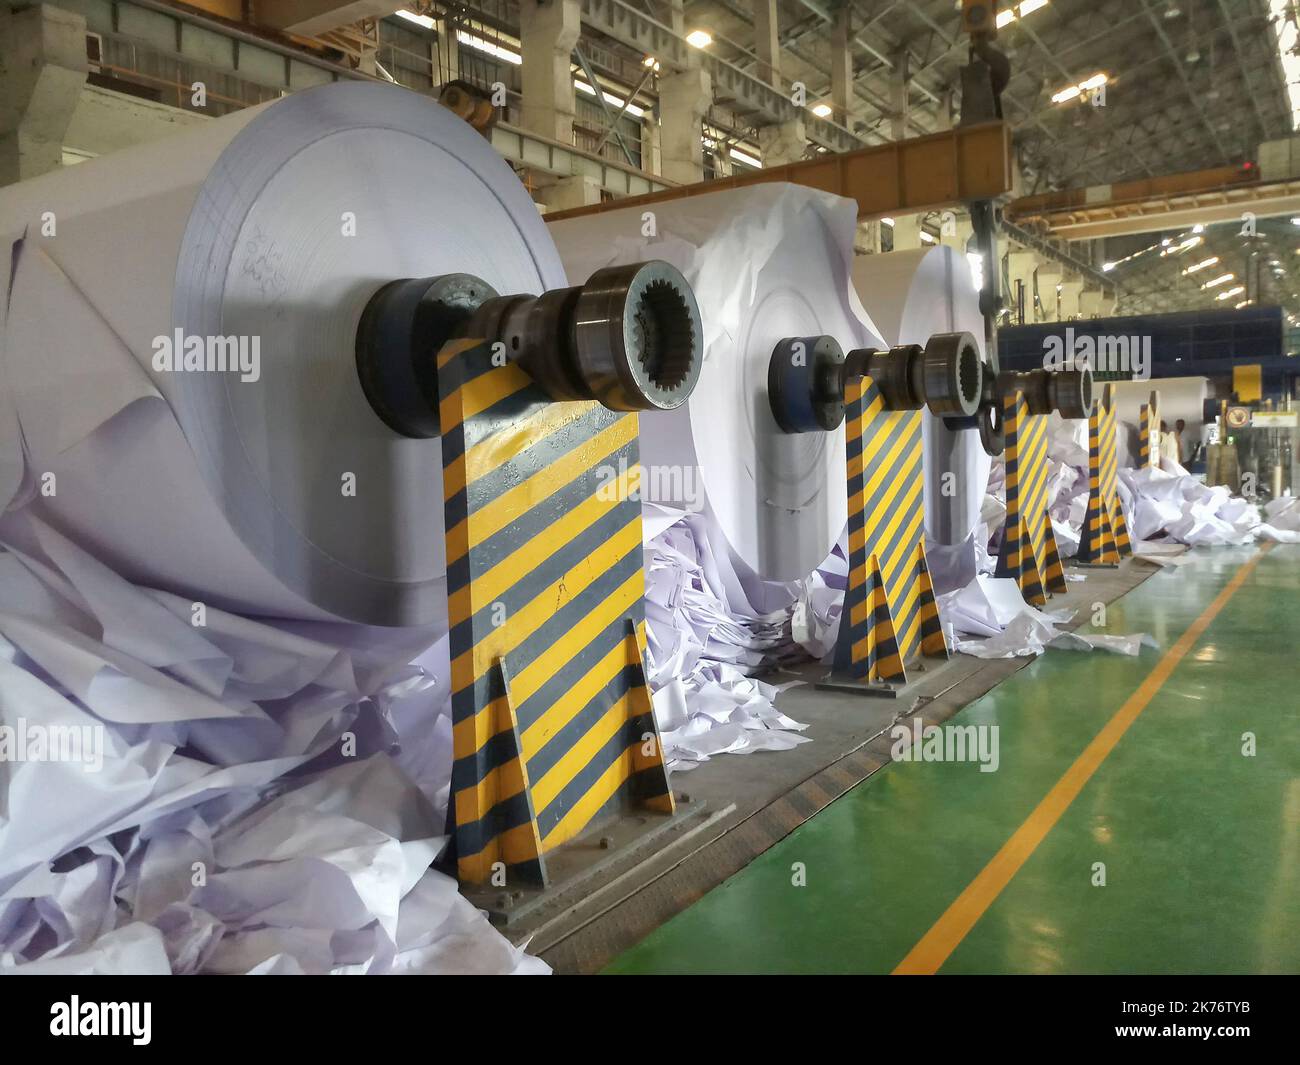 Kolkata, West Bengal, India - 16th May 2019 : White Paper Reels are being manufactured in a big paper manufacturing plant. Indian paper industry image Stock Photo